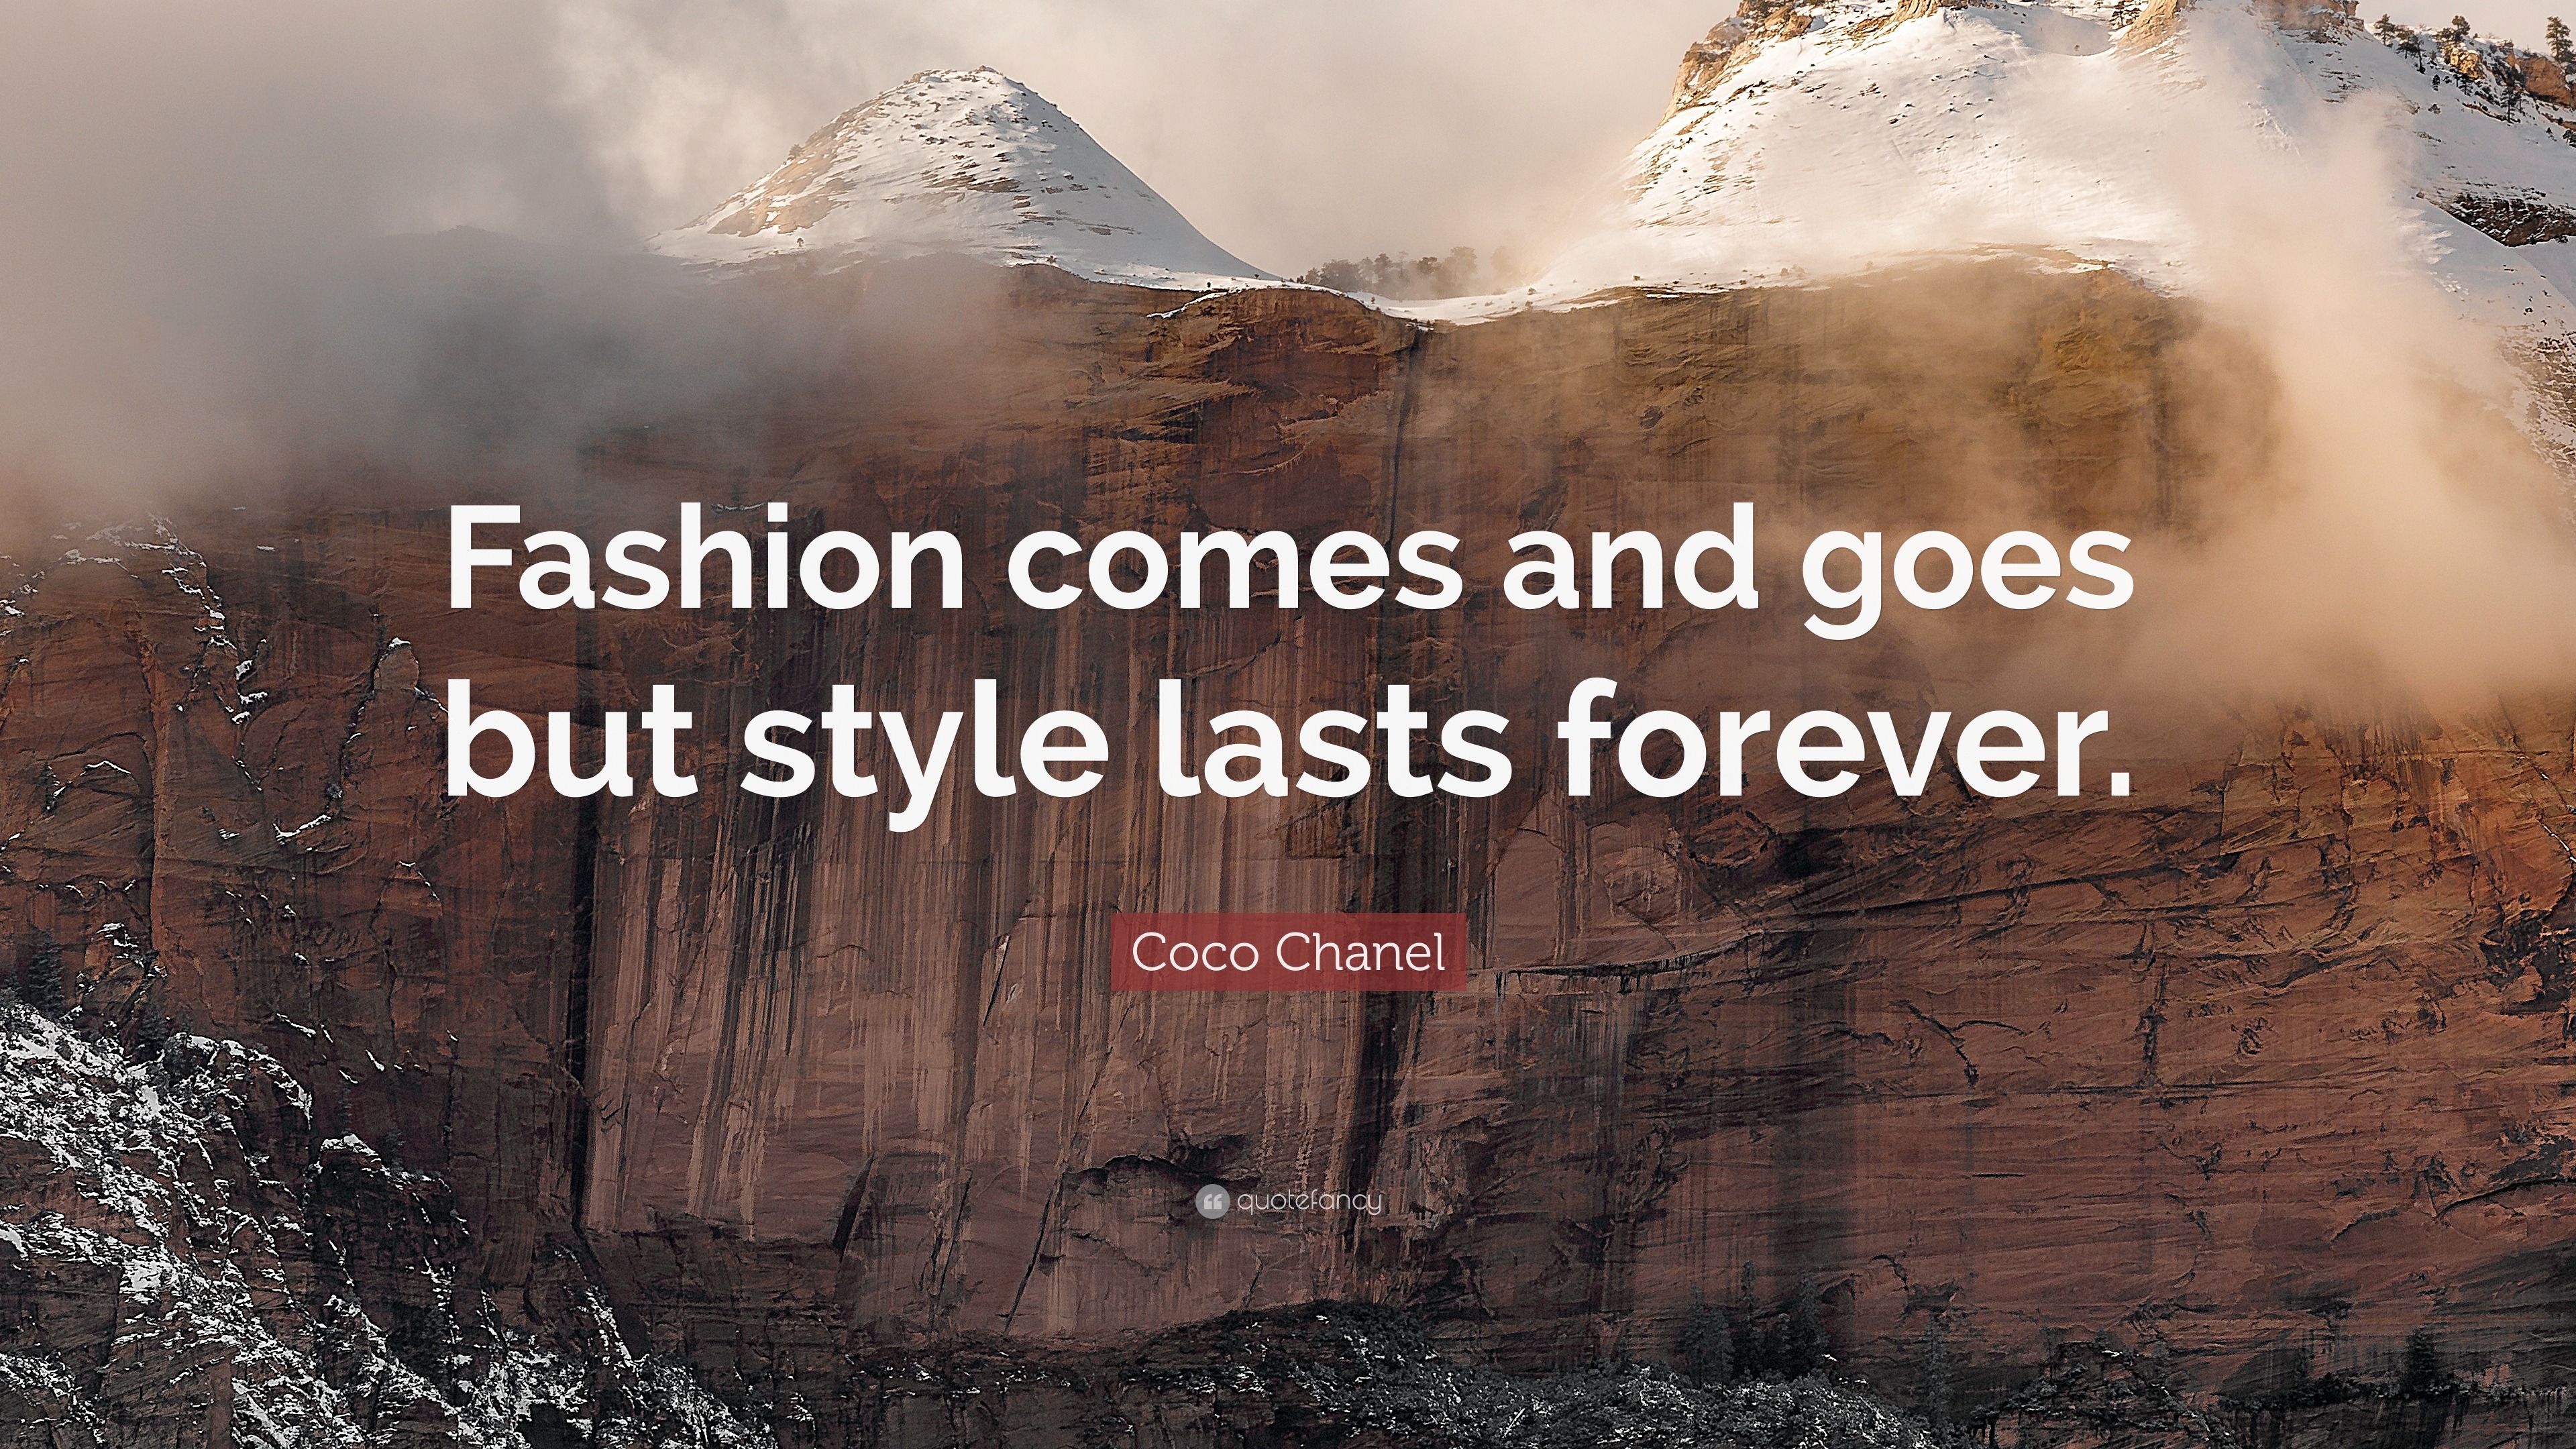 Coco Chanel Quote: “Fashion comes and goes but style lasts forever.”